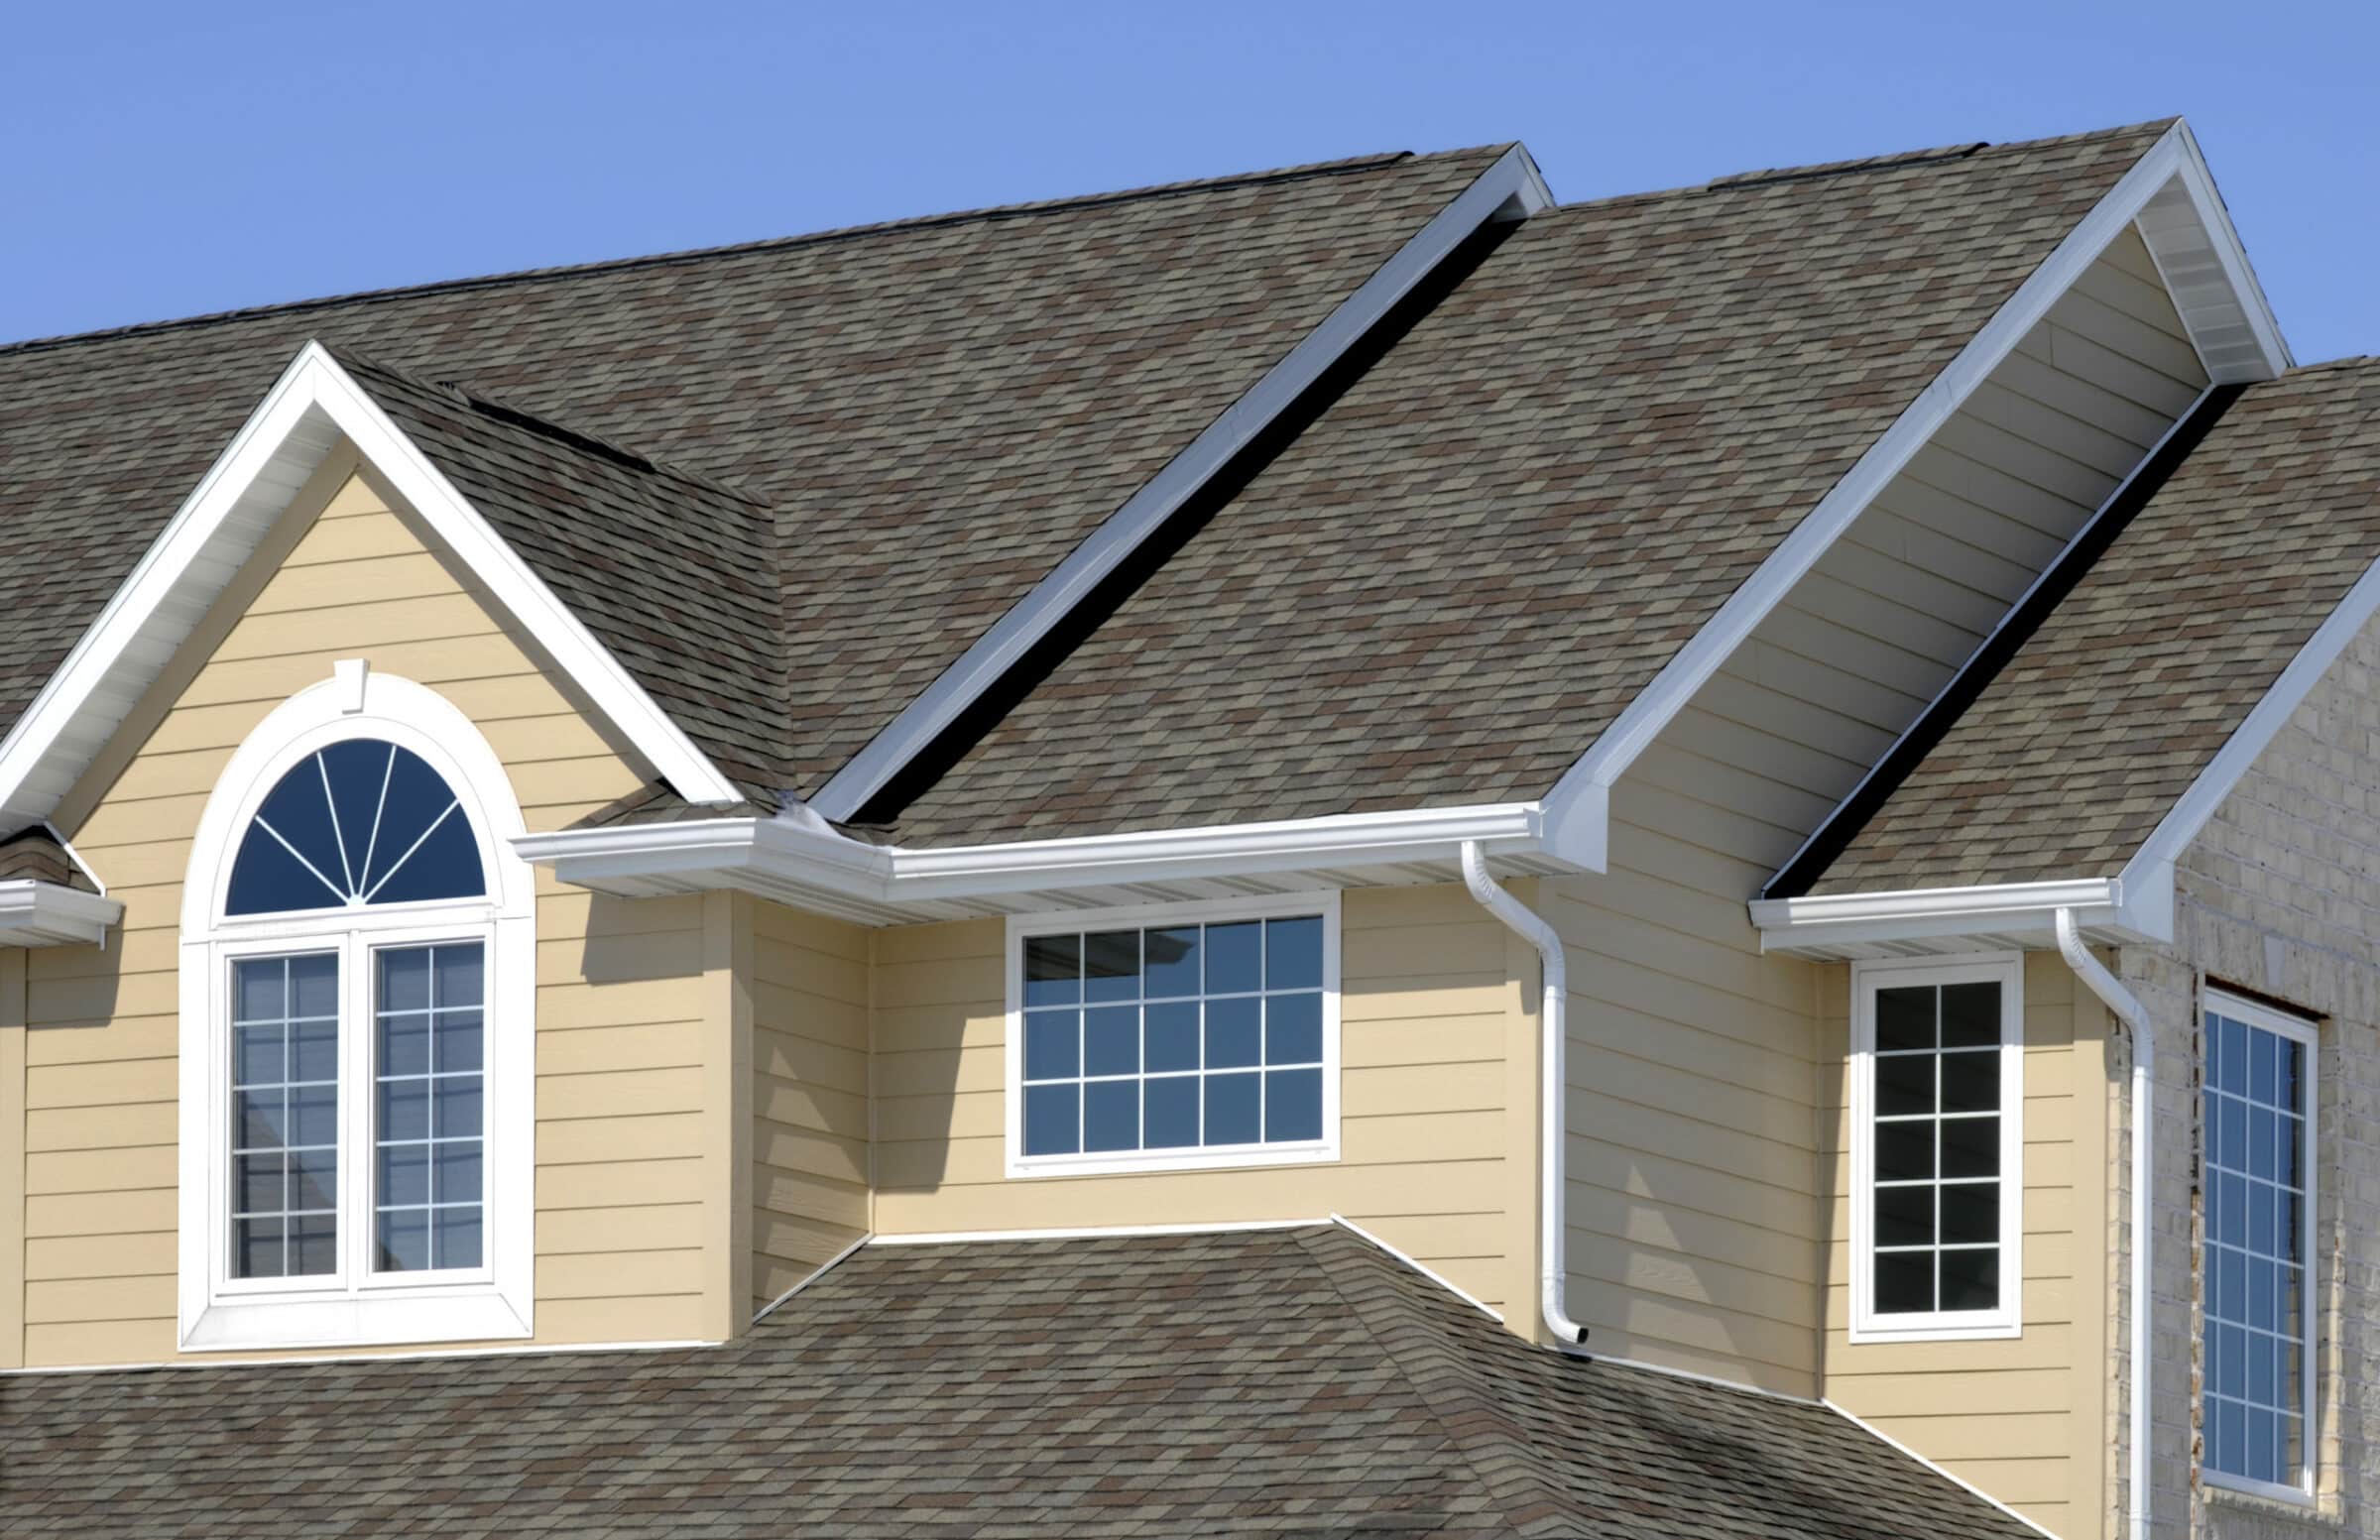 Iowa Legends Roofing & Remodeling